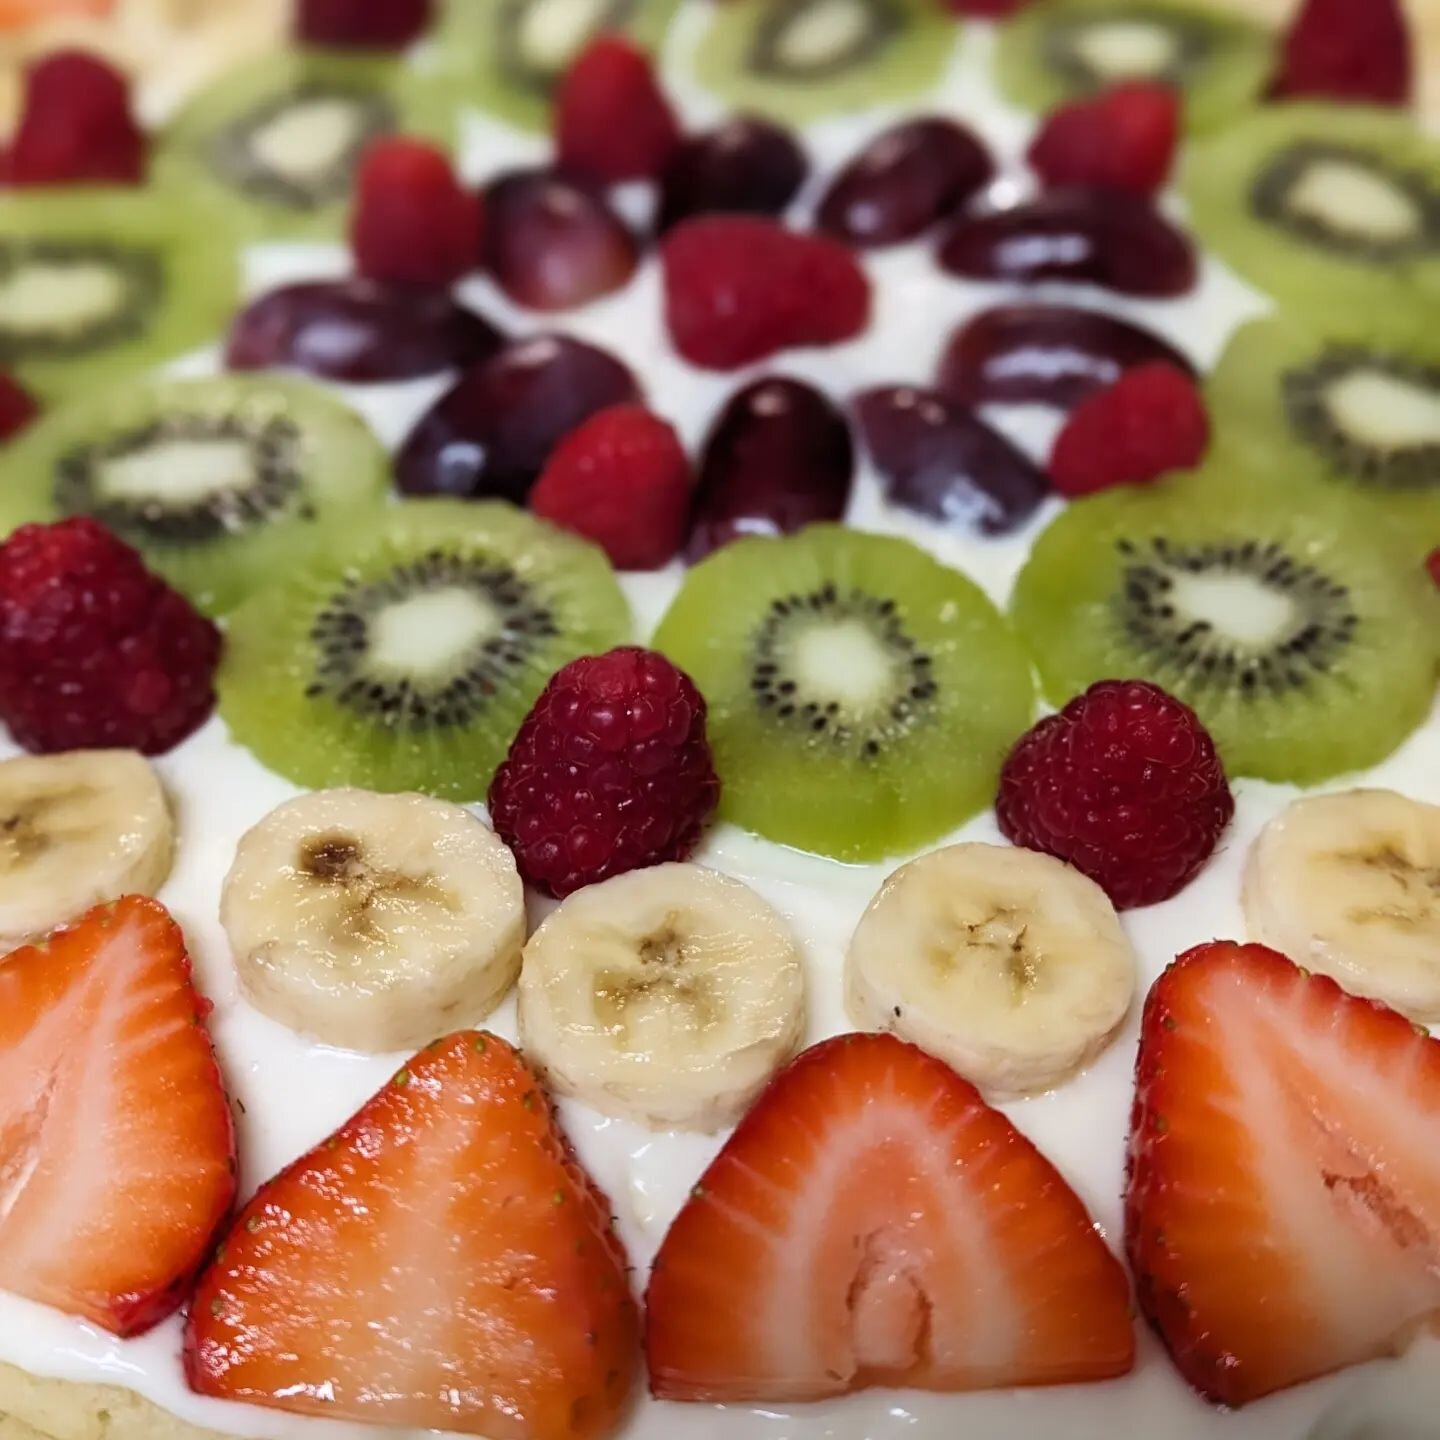 Childhood throwback:
My family would make fruit pizza a lot, so it's a little splurge thing for me as an adult. Hadn't made one in forever! 🤤😍